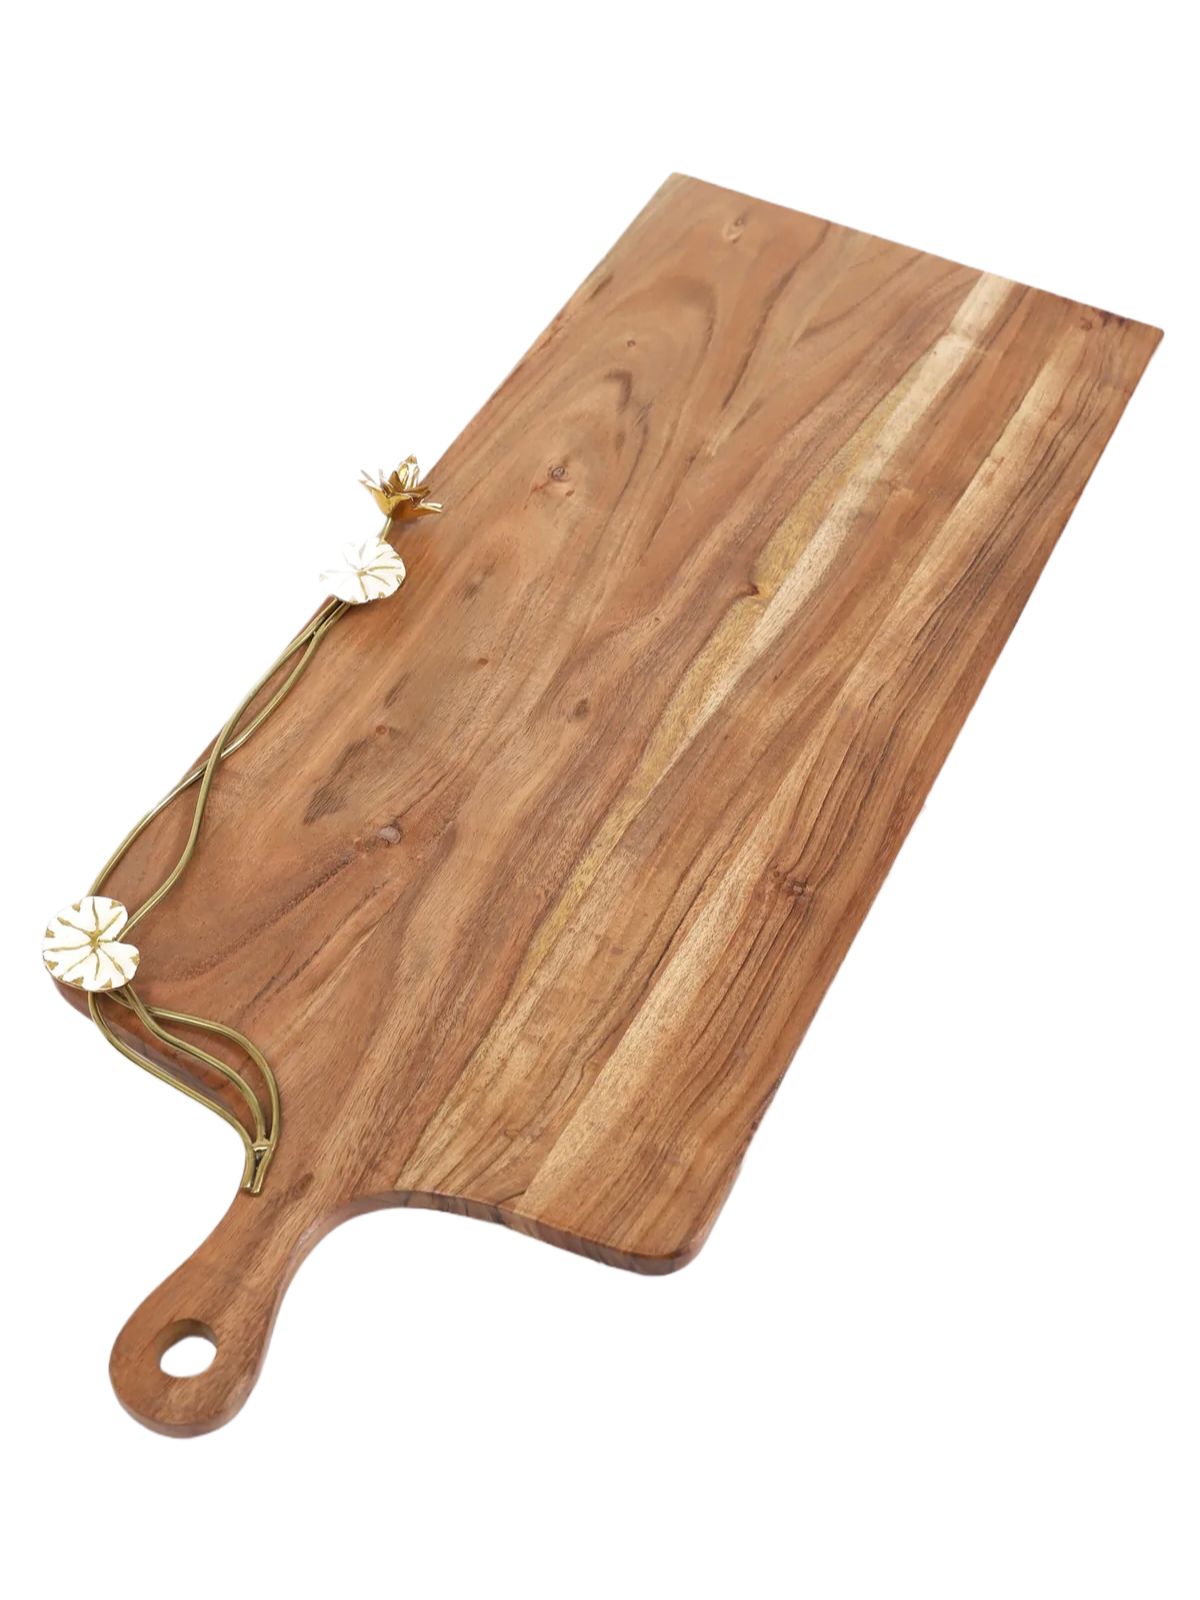 Luxurious Wood Charcuterie Board with White Lotus Flower Design and Handle, 28L X 11W.